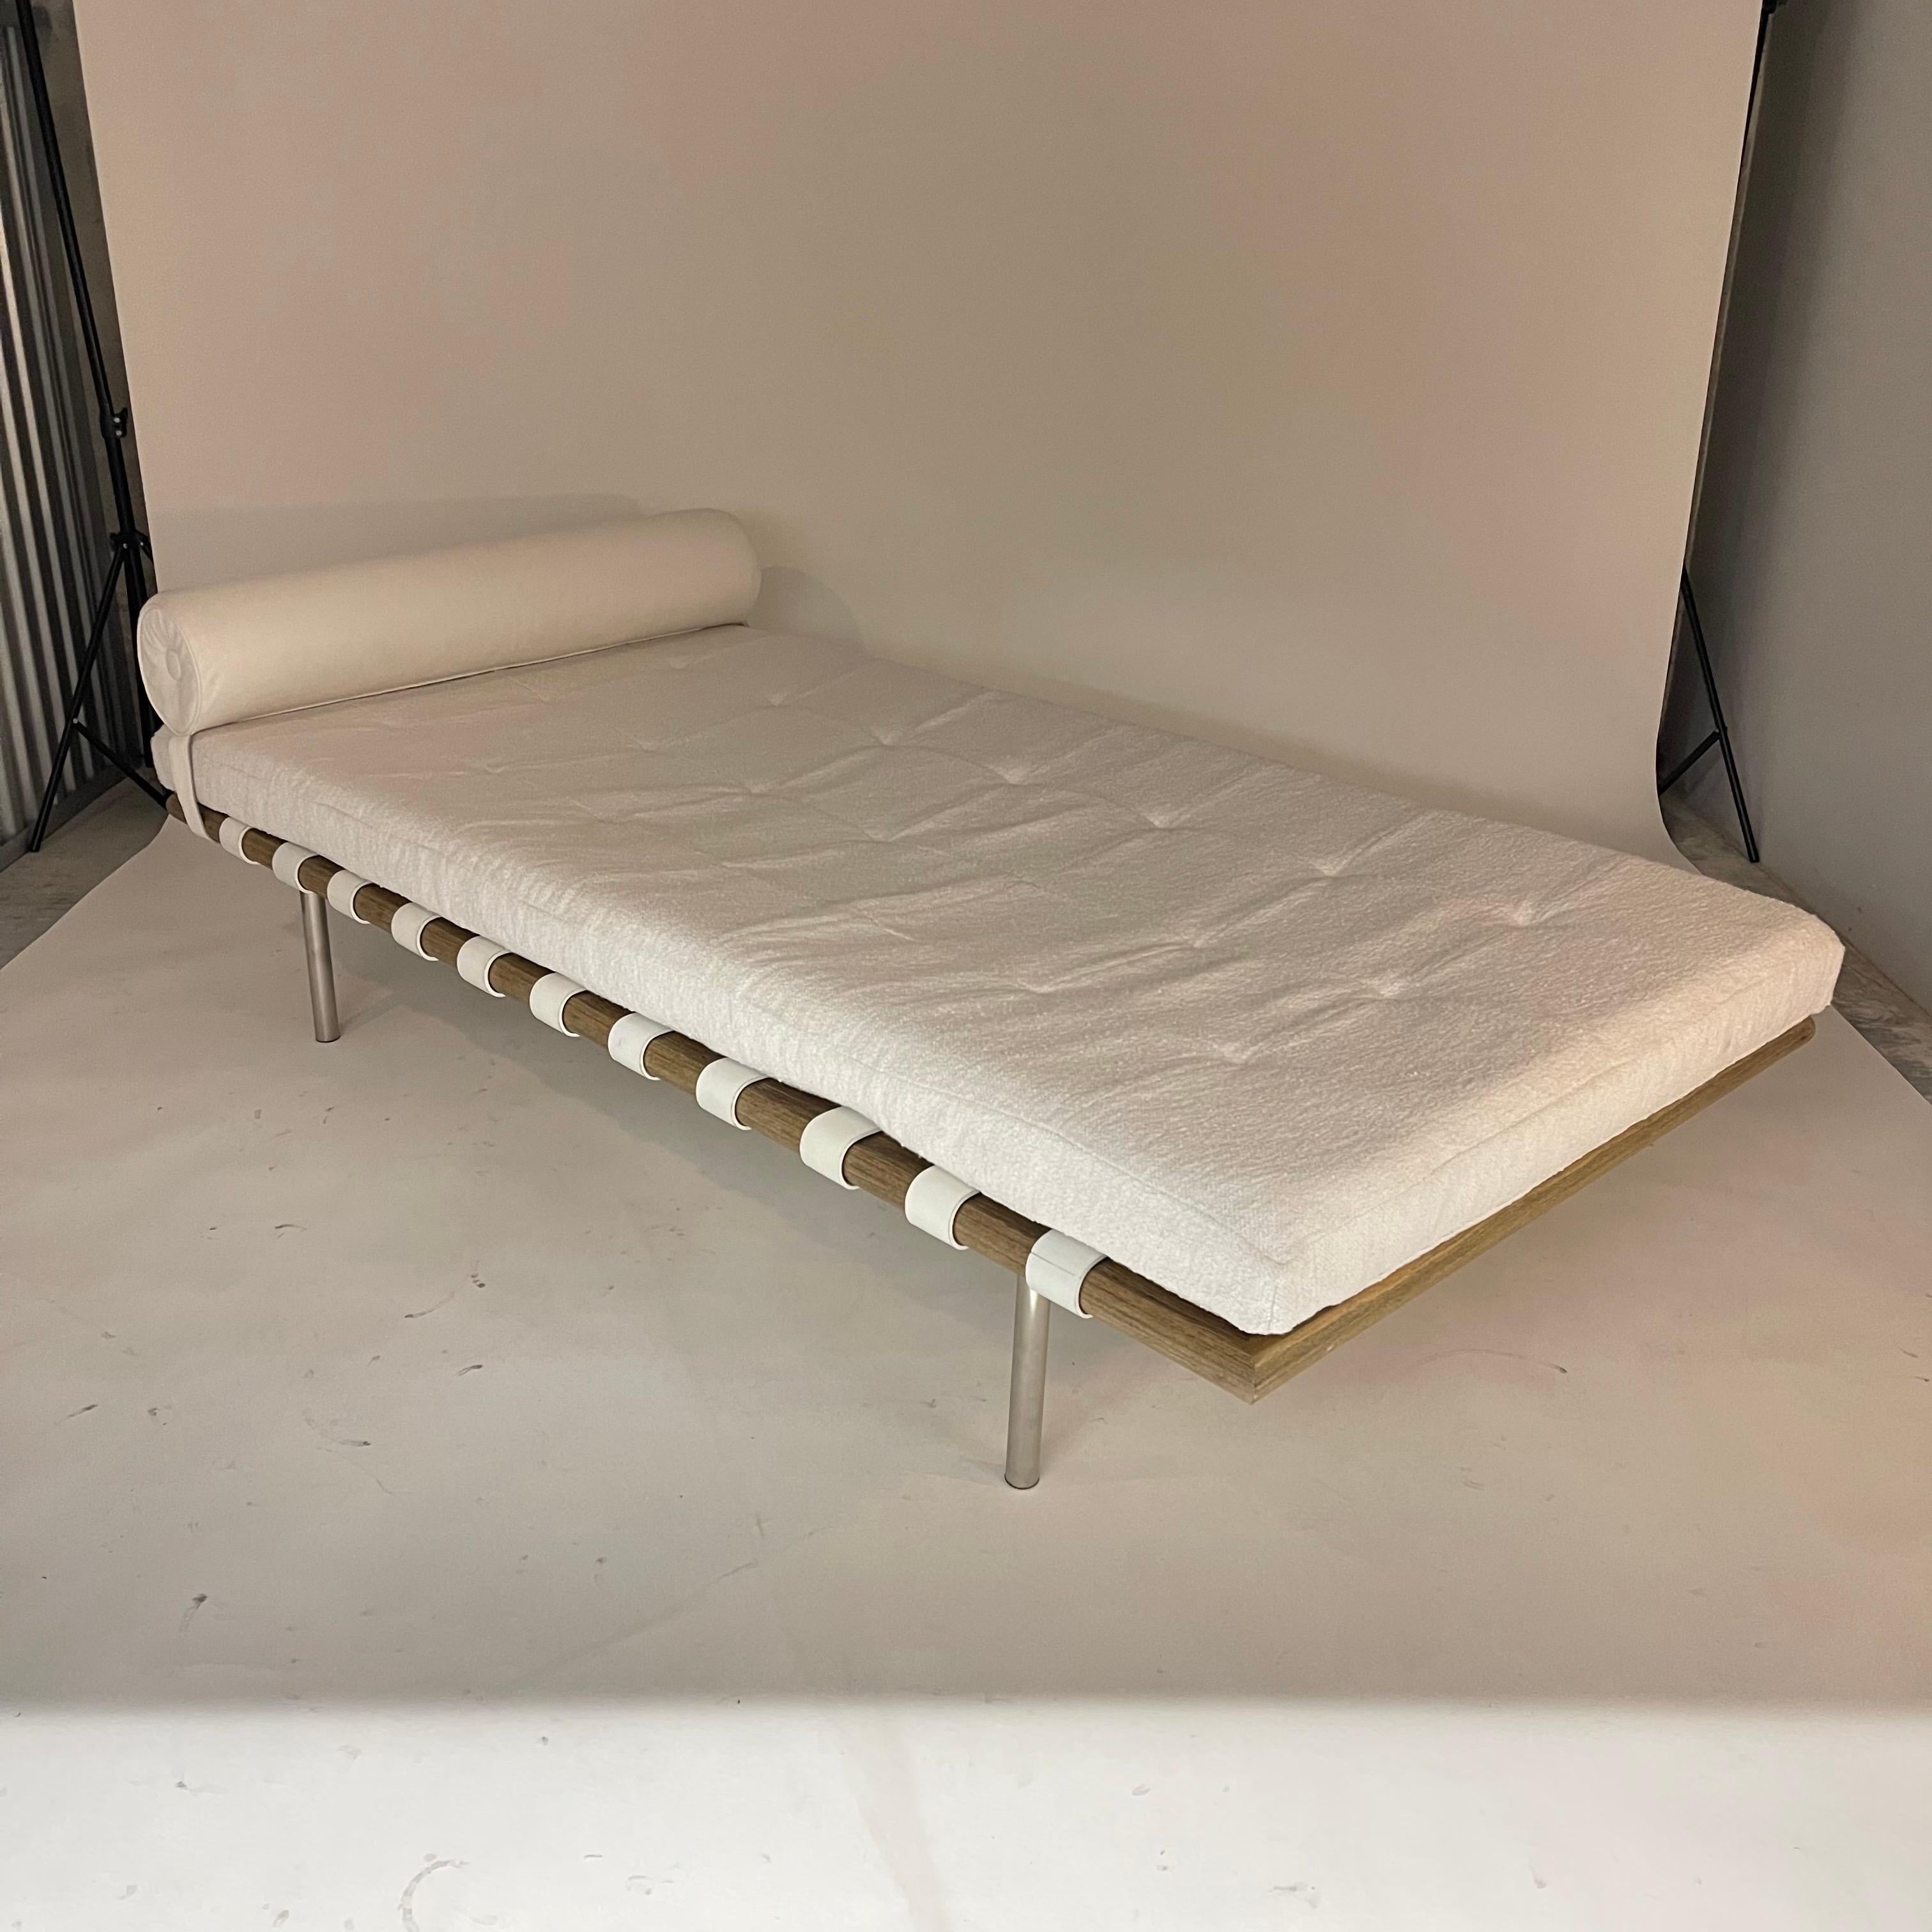 Original Vintage Midcentury chaise lounge rendered in a driftwood stained oak frame polished steel legs leather bolster cushion and strapping with a Holly Hunt Great Plains upholstered biscuit tufted mattress cushion.

Original straps were left to